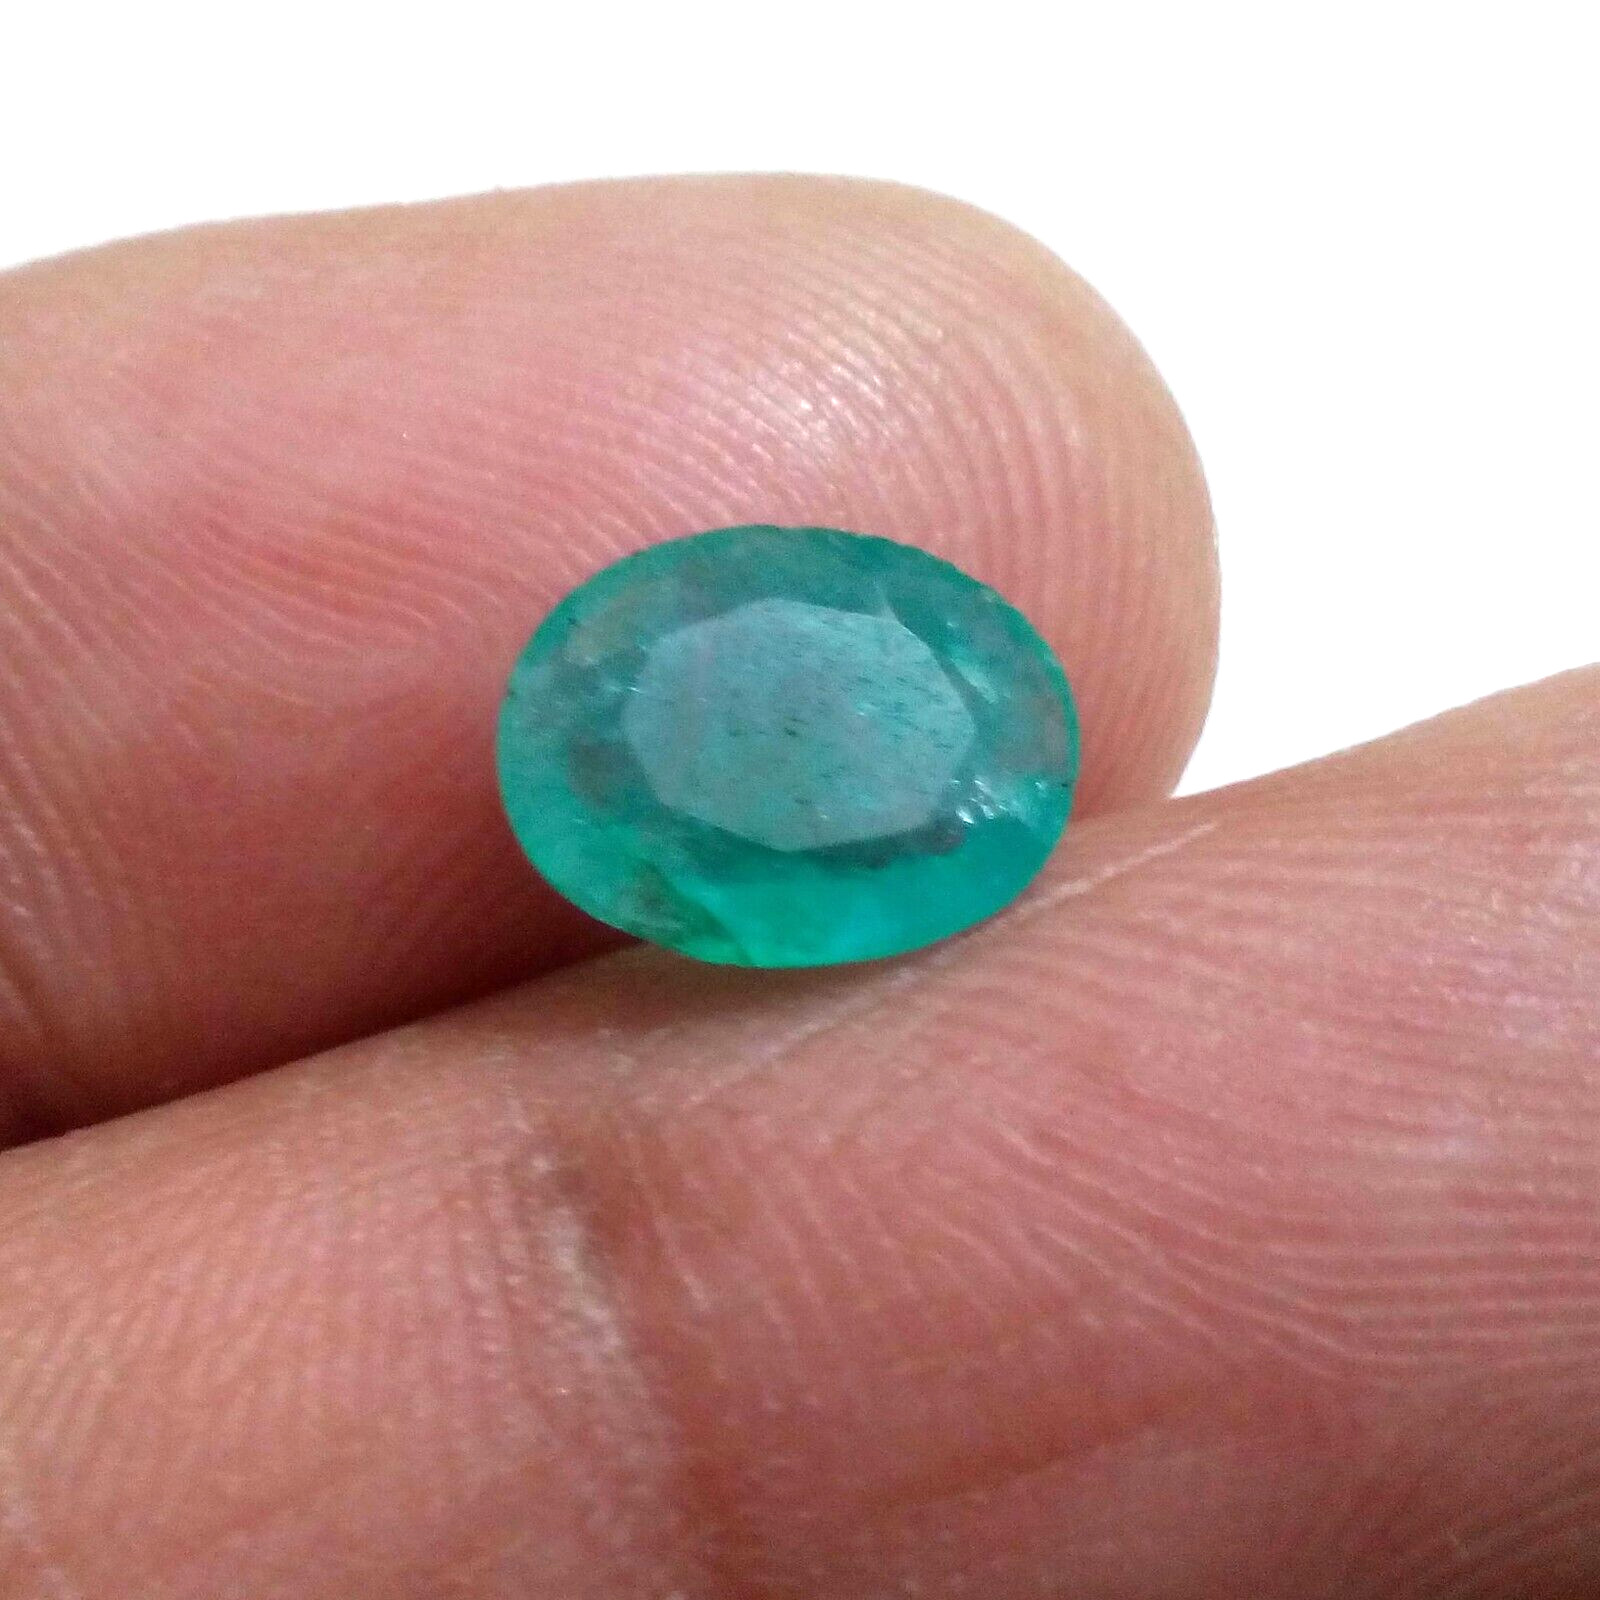 Excellent Zambian Emerald Faceted Oval Shape 1.60 Crt Emerald Loose Gemstone